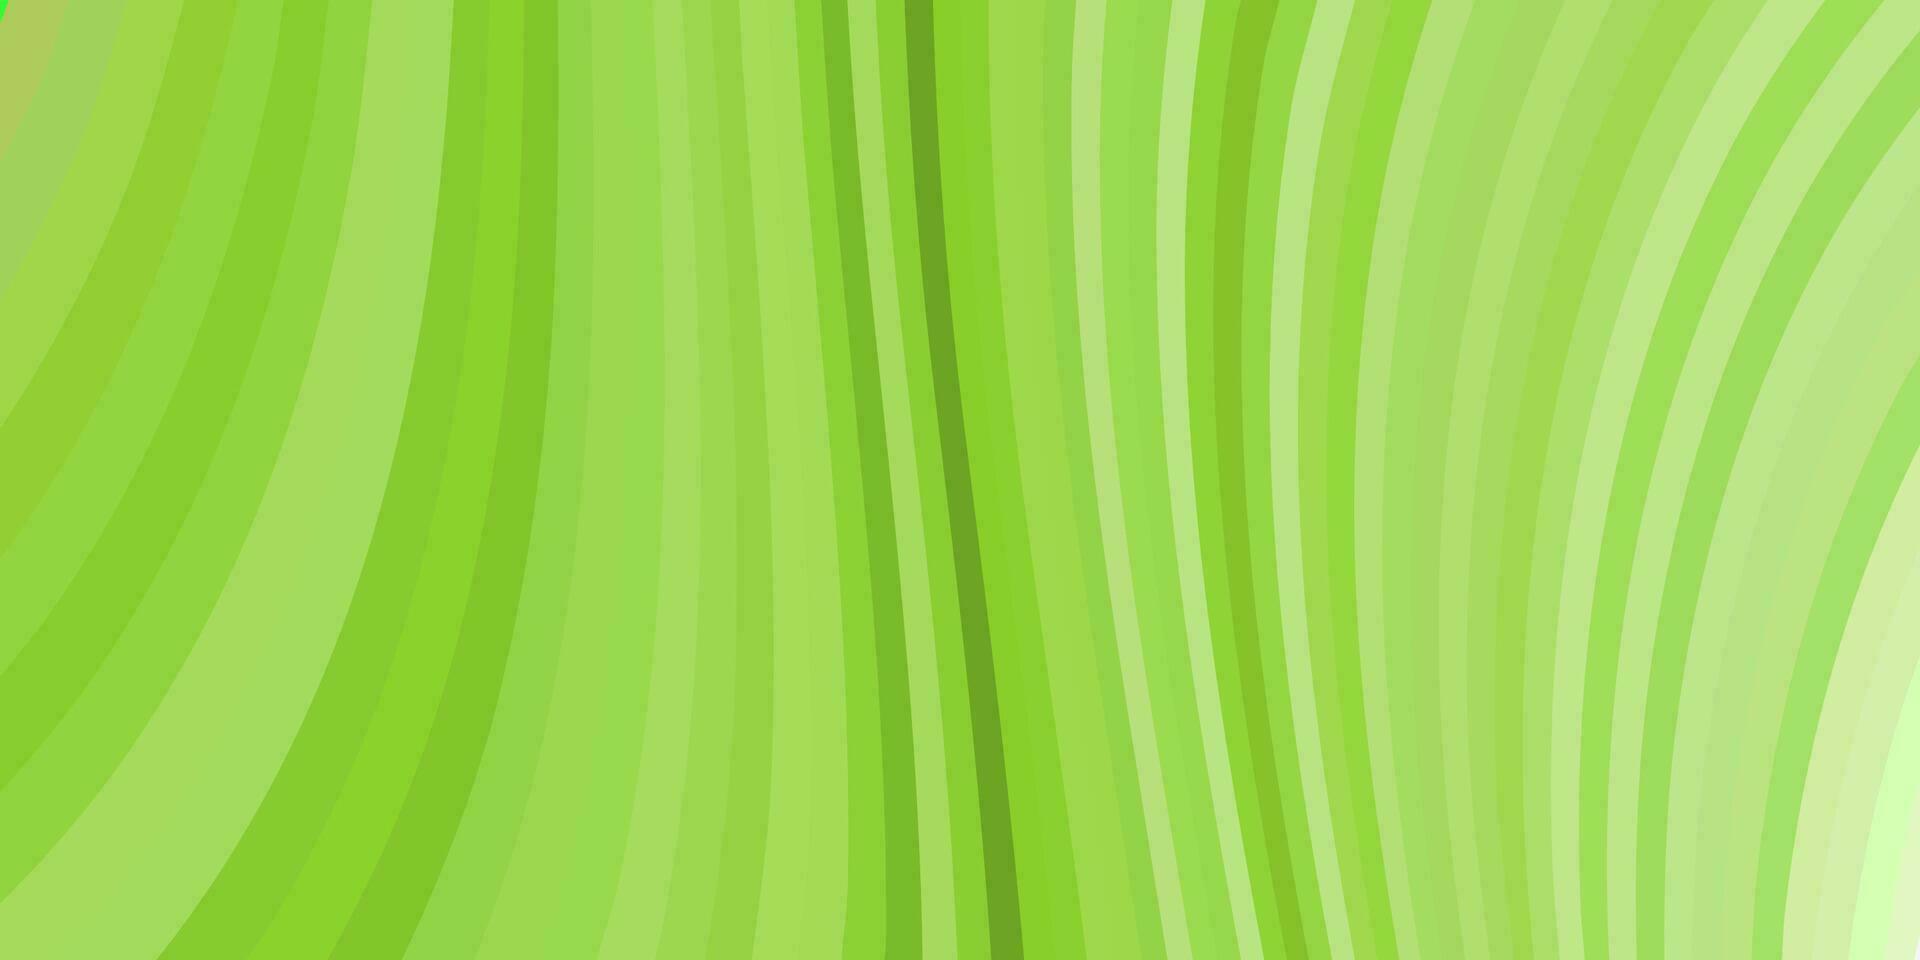 abstract green curve background for business vector